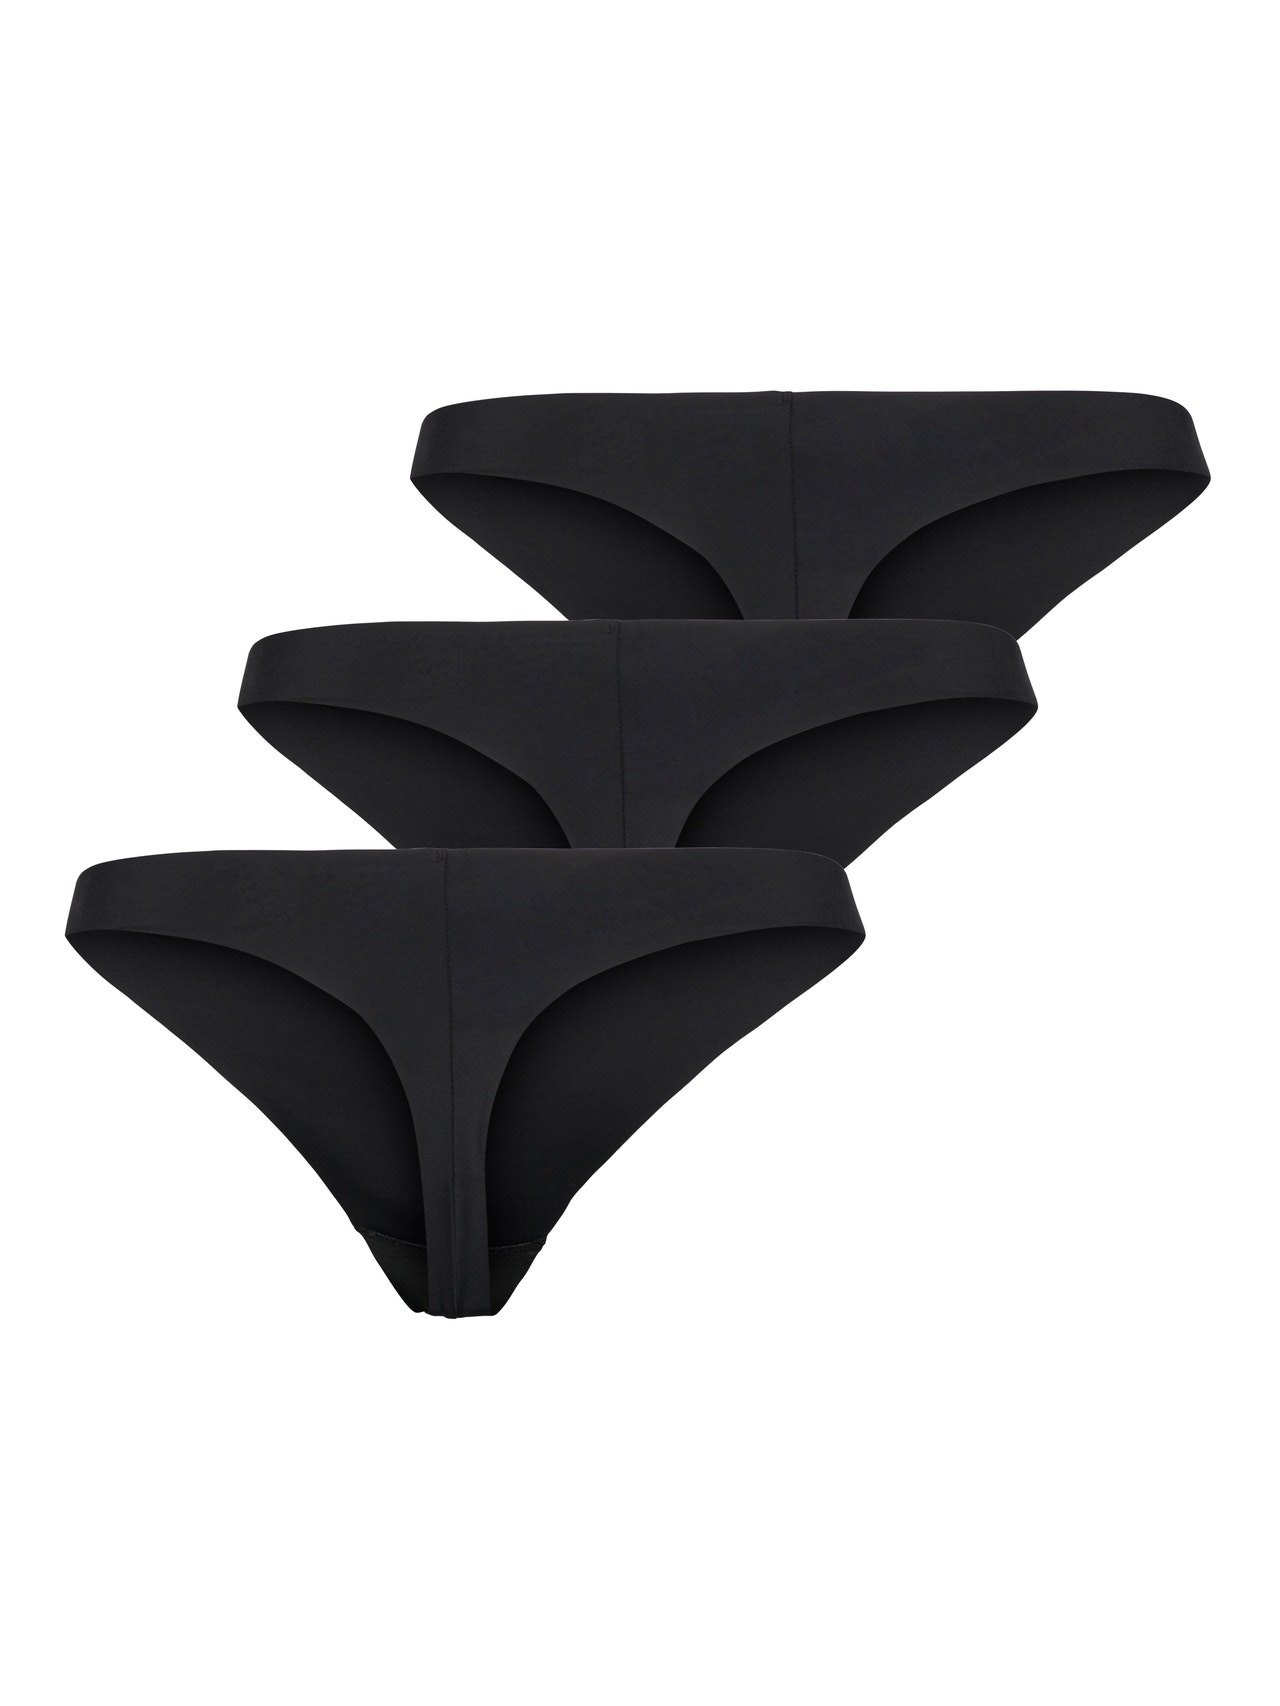 Disposable Black Thong Adult One Size Fits Most Sold As 100 Thongs Per Bag  # 900502-1